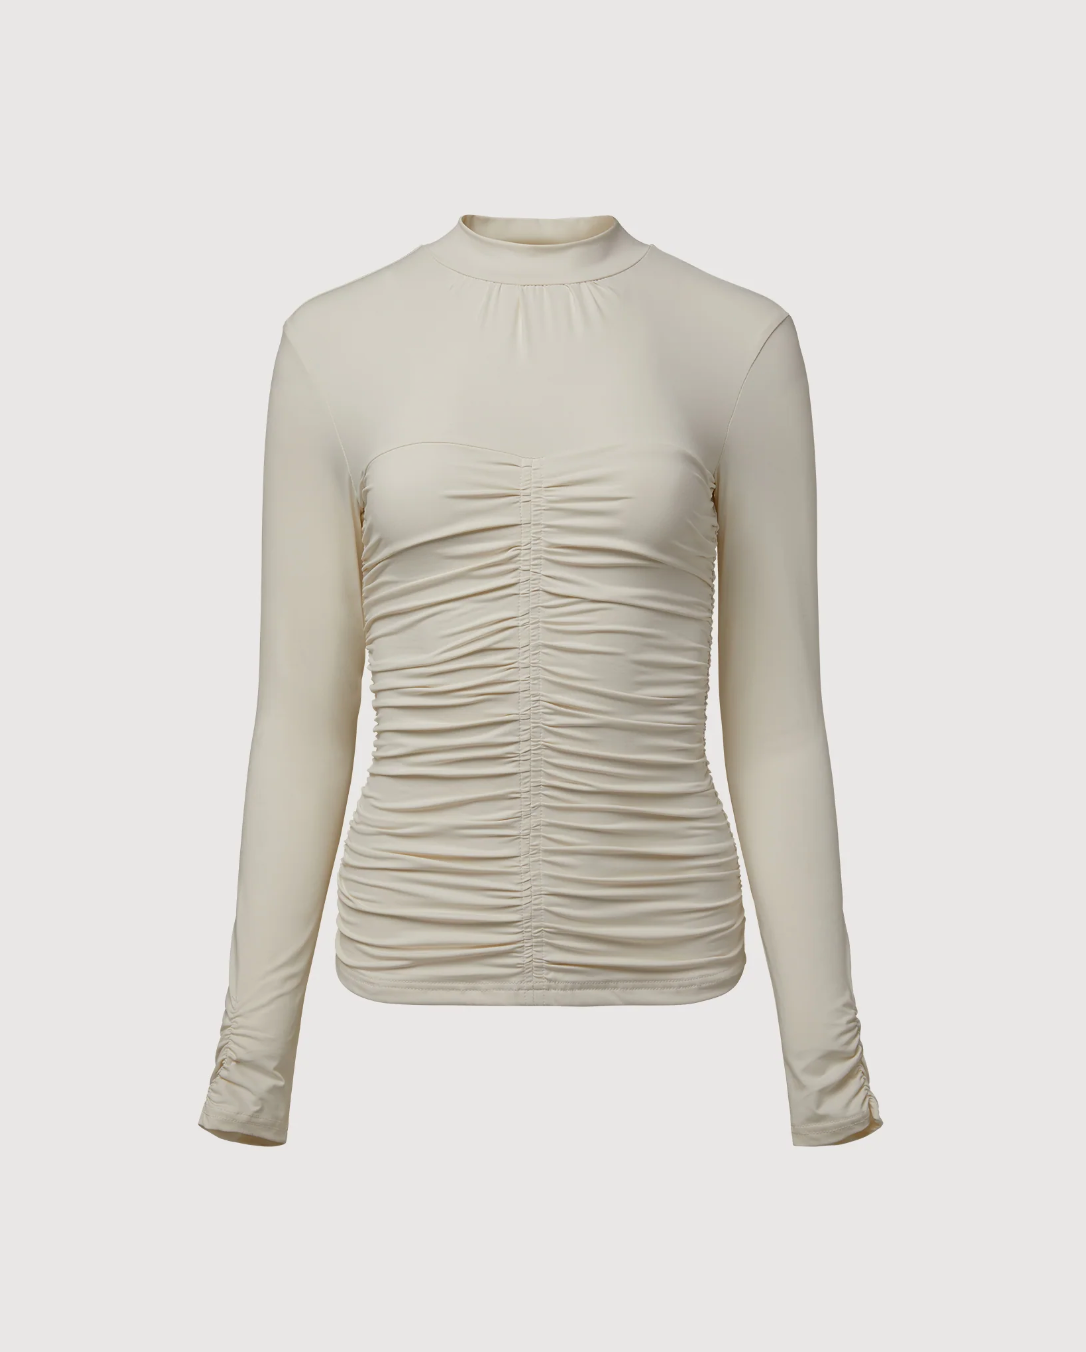 Photo of Long Sleeve Ruched Mock Neck in ivory from Rachel Parcell available at UniKoncept in Waterloo